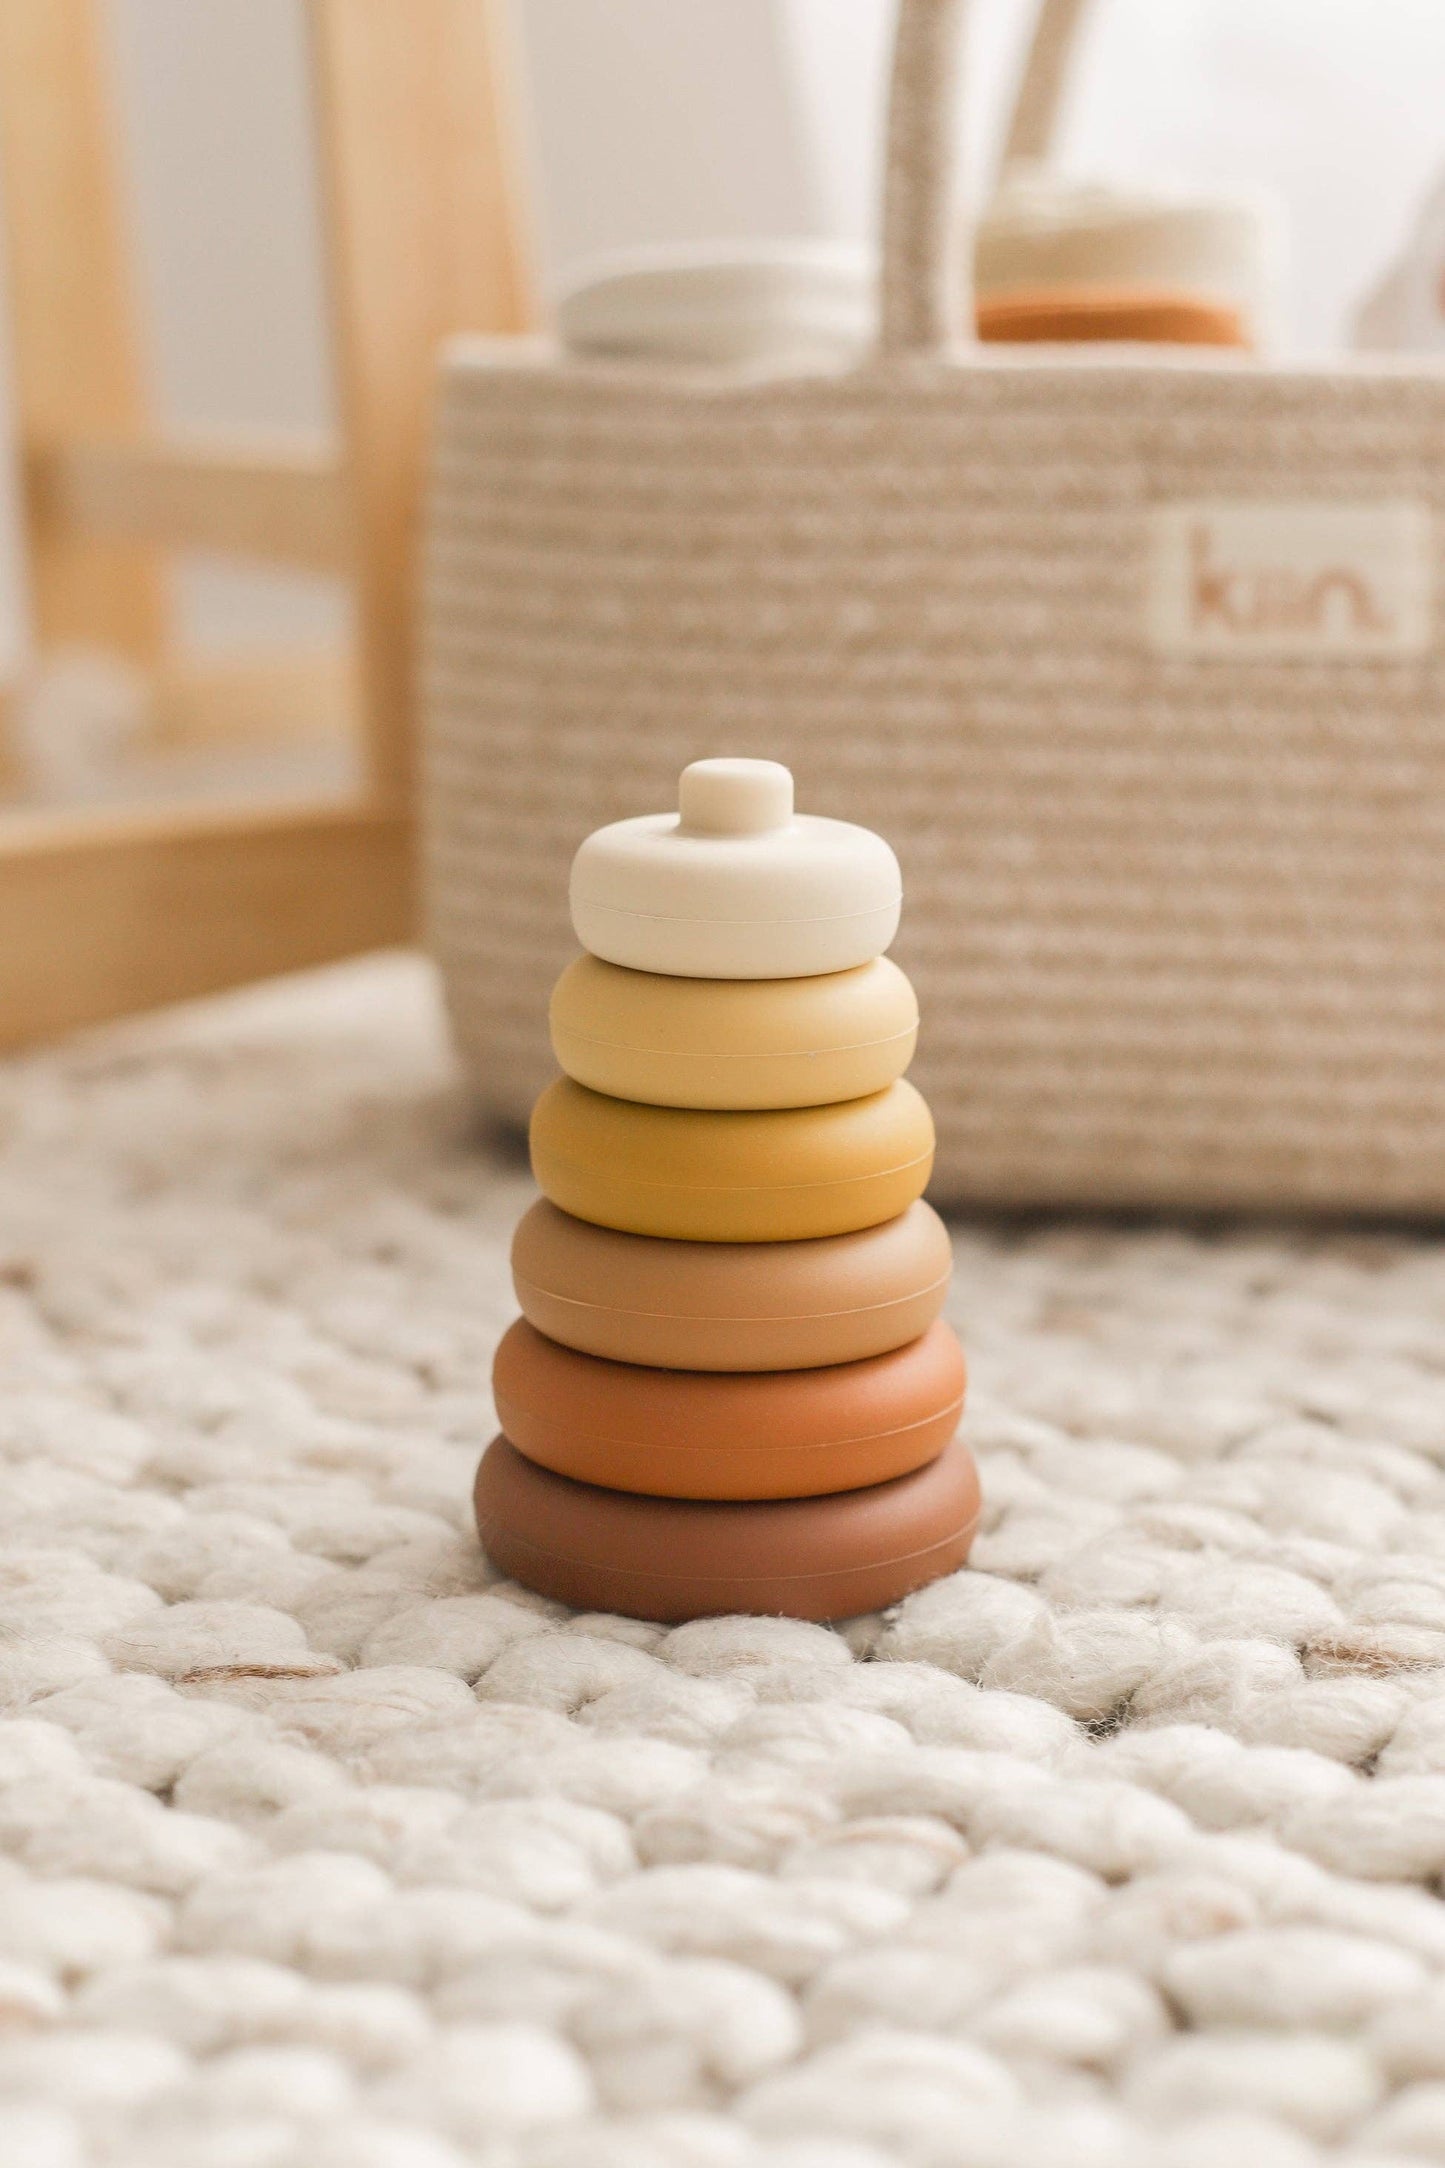 Round Stacking Tower Toy